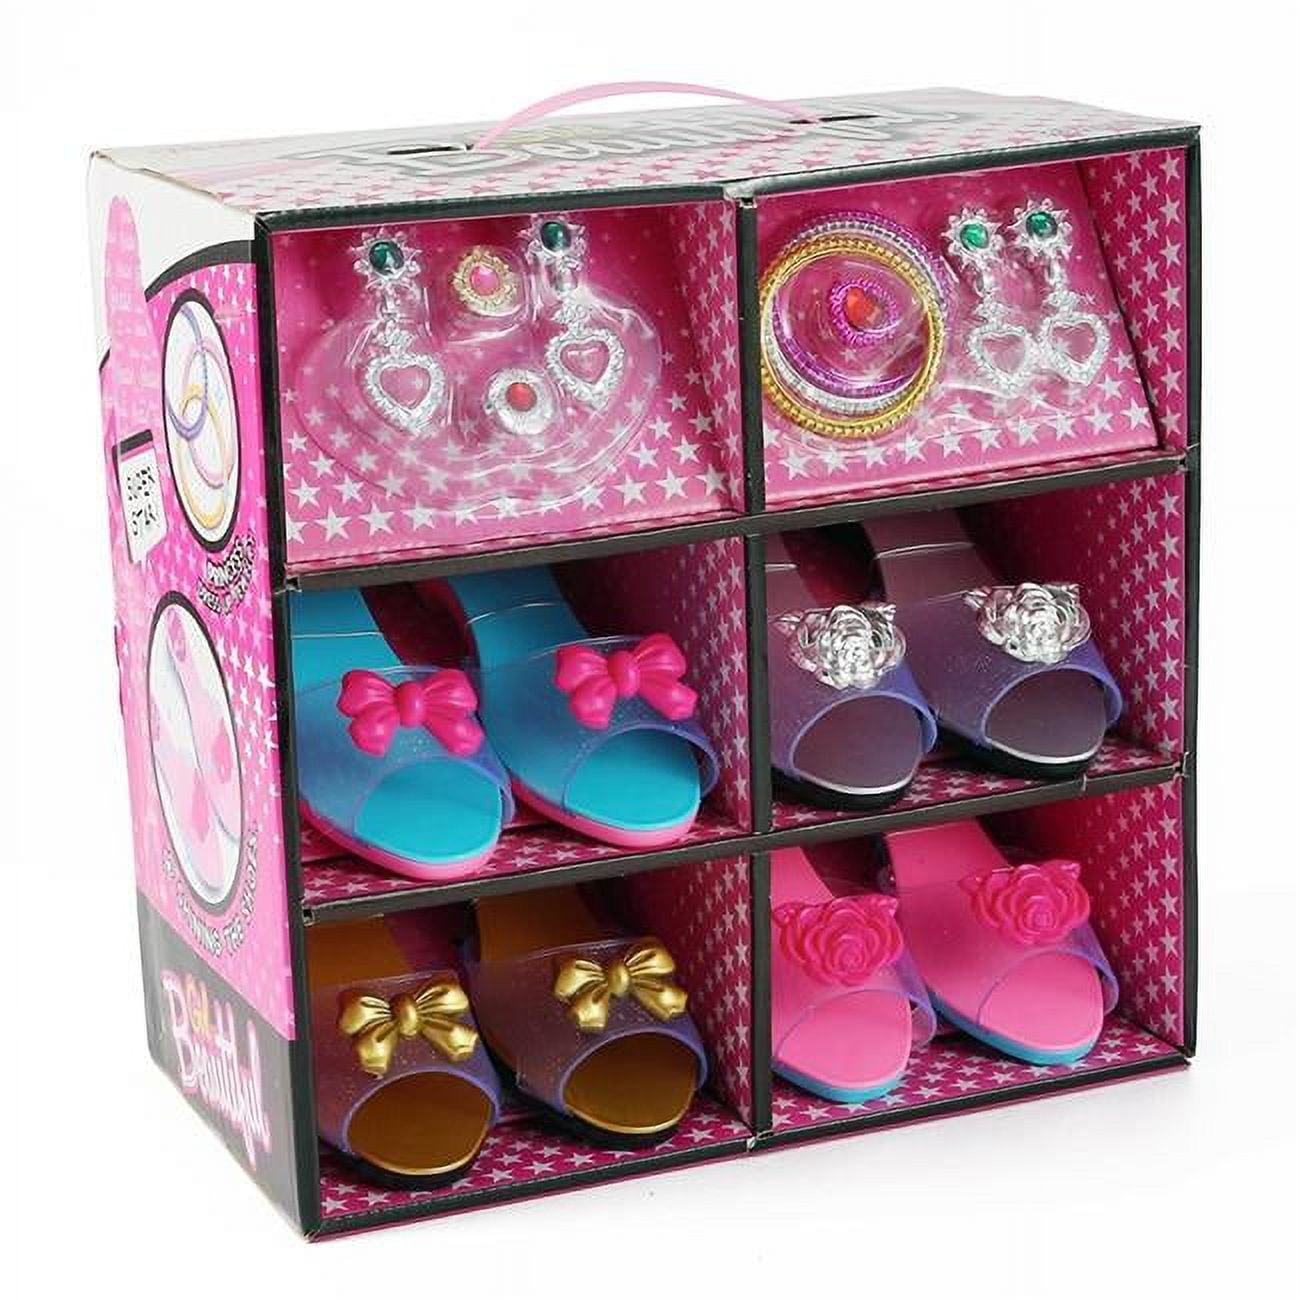 Ps003 Princess Dress Up & Play Shoe & Jewelry Boutique Collection